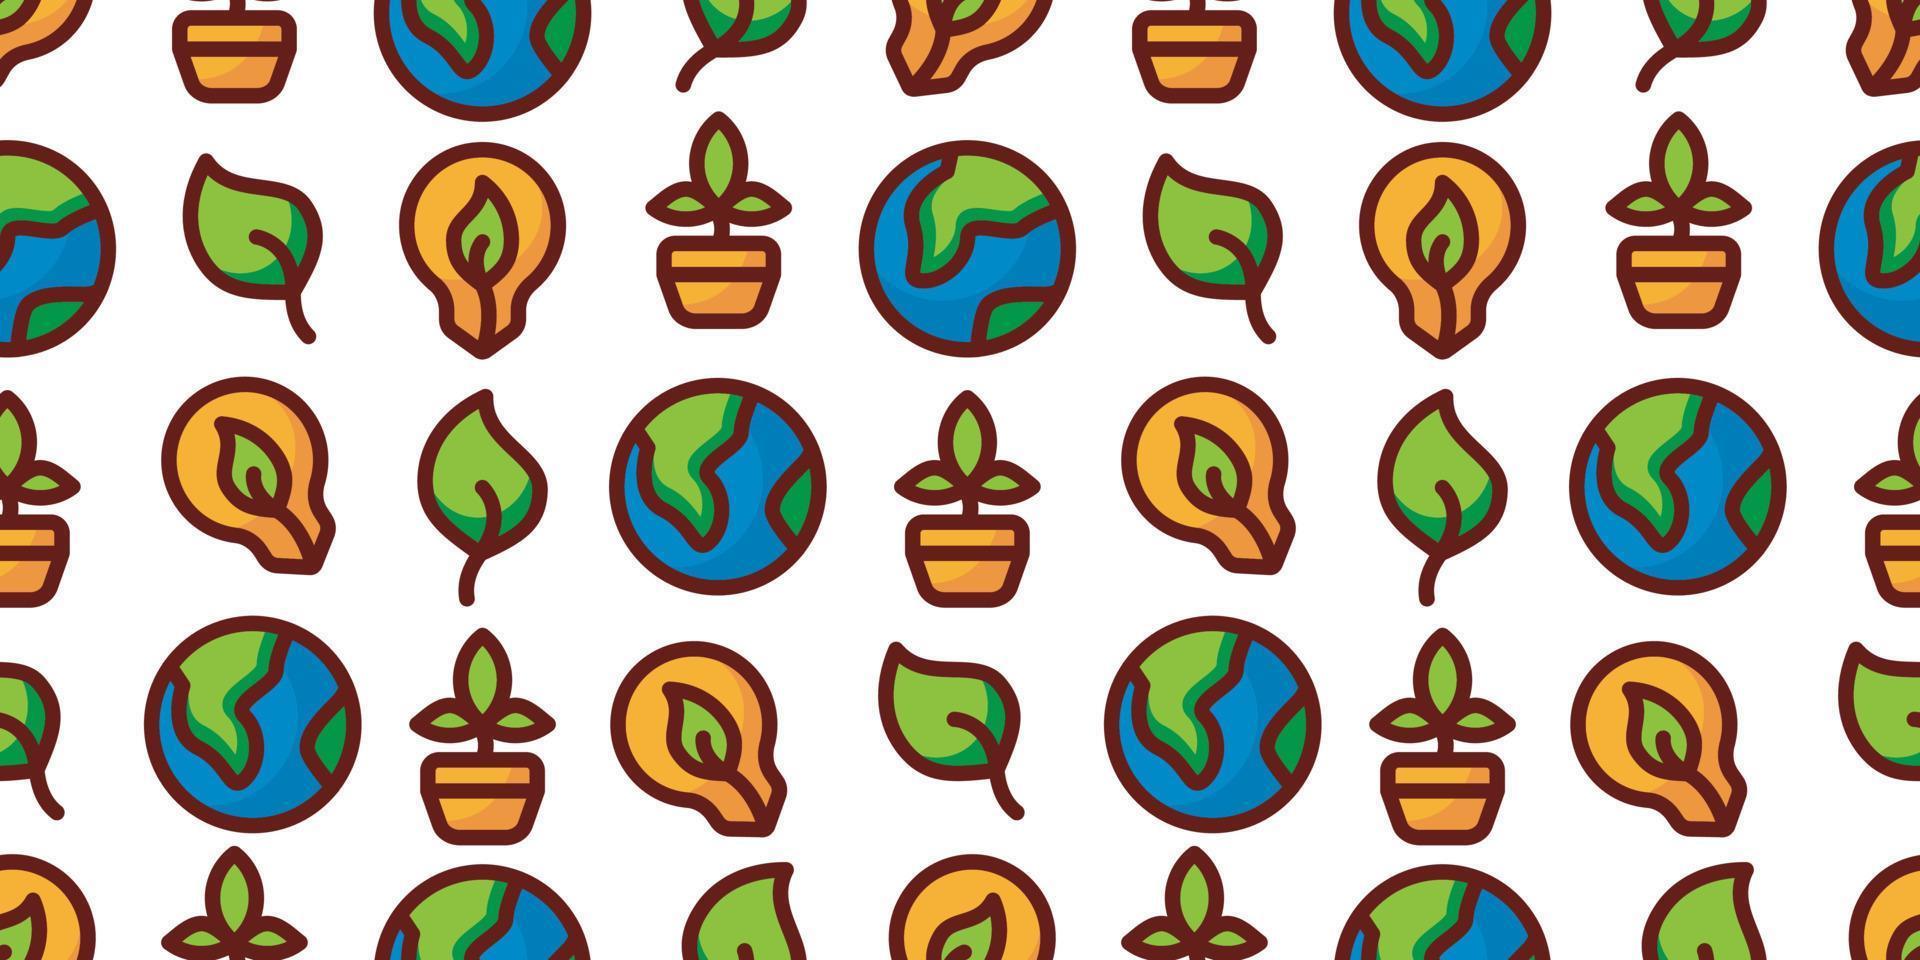 Ecology seamless pattern with small eco icons. Vector background illustration.